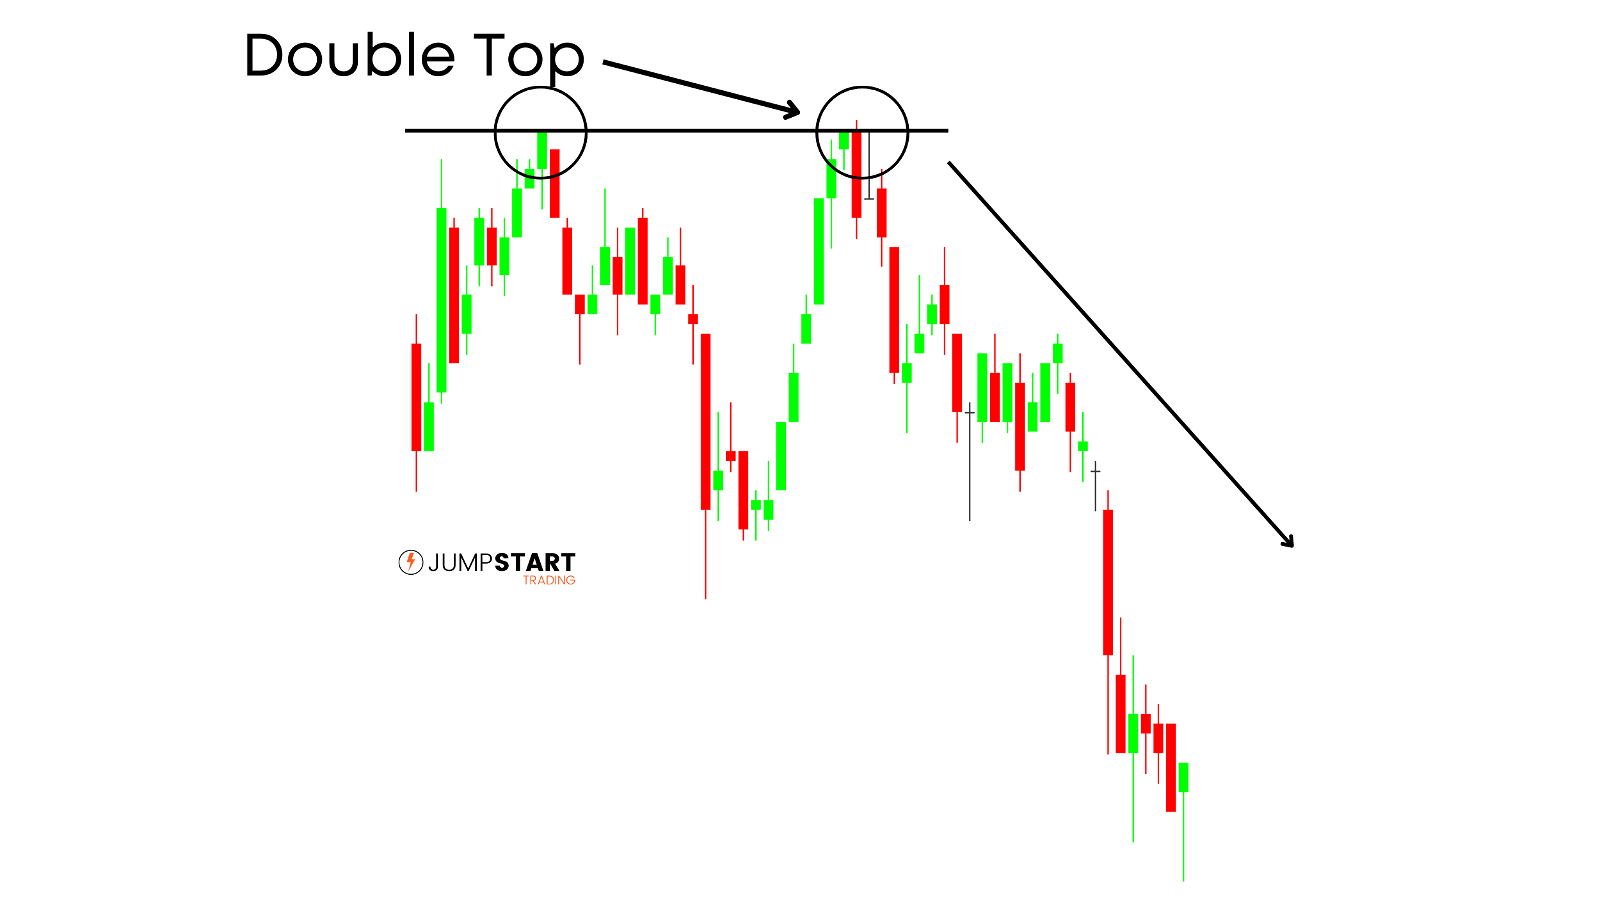 Price forming a double top then selling off